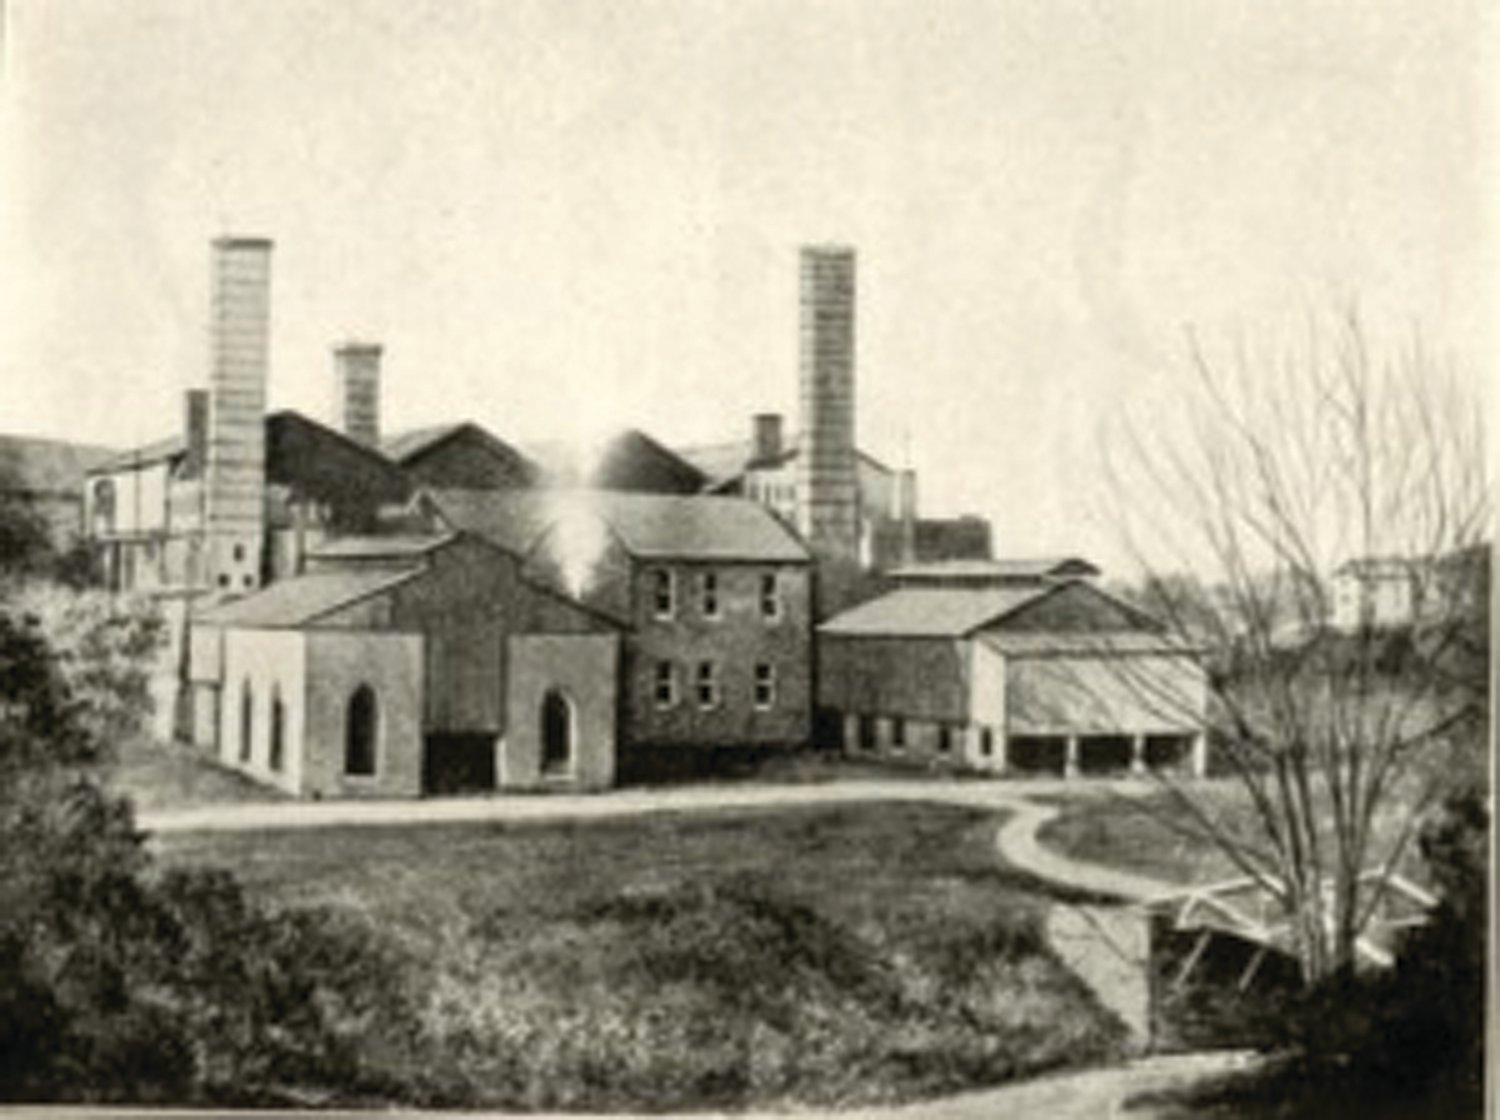 The Durham Iron Co., commonly called the Durham Furnace and situated on Route 212 near the Delaware River, operated from 1849 through 1908.